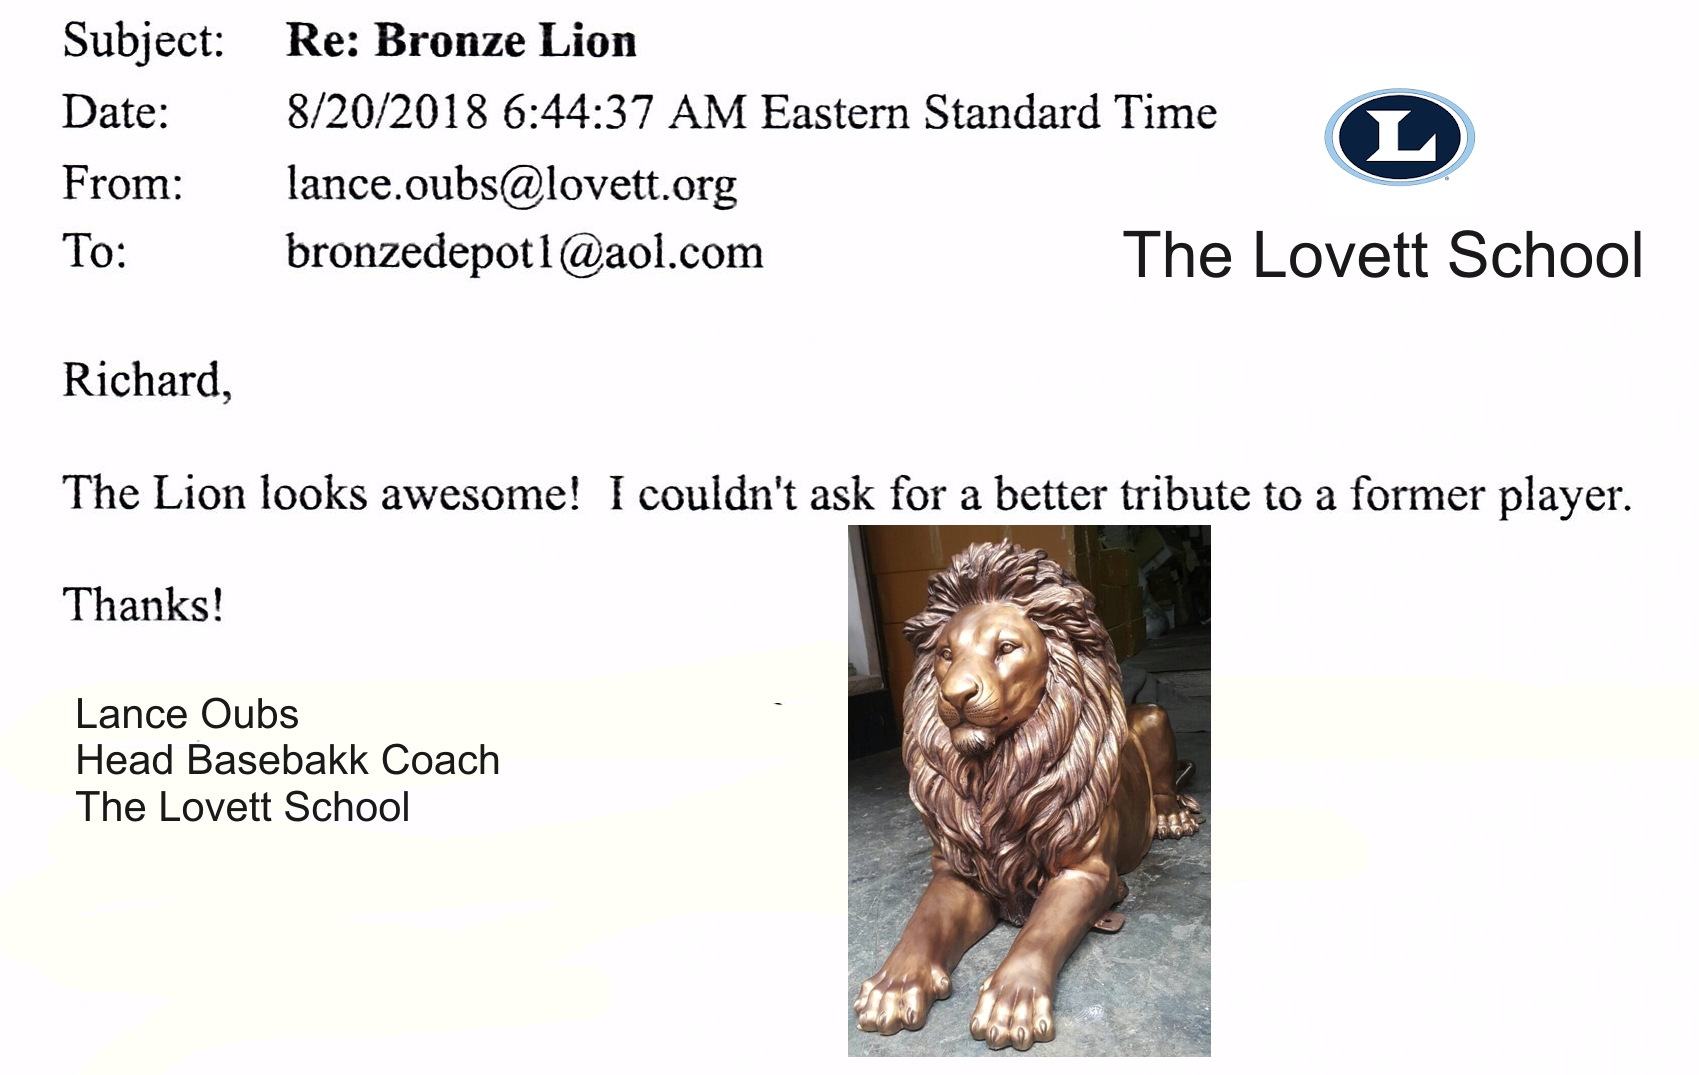 The Lion looks awesome **Coach’s Reference** - DD A-228 Reference